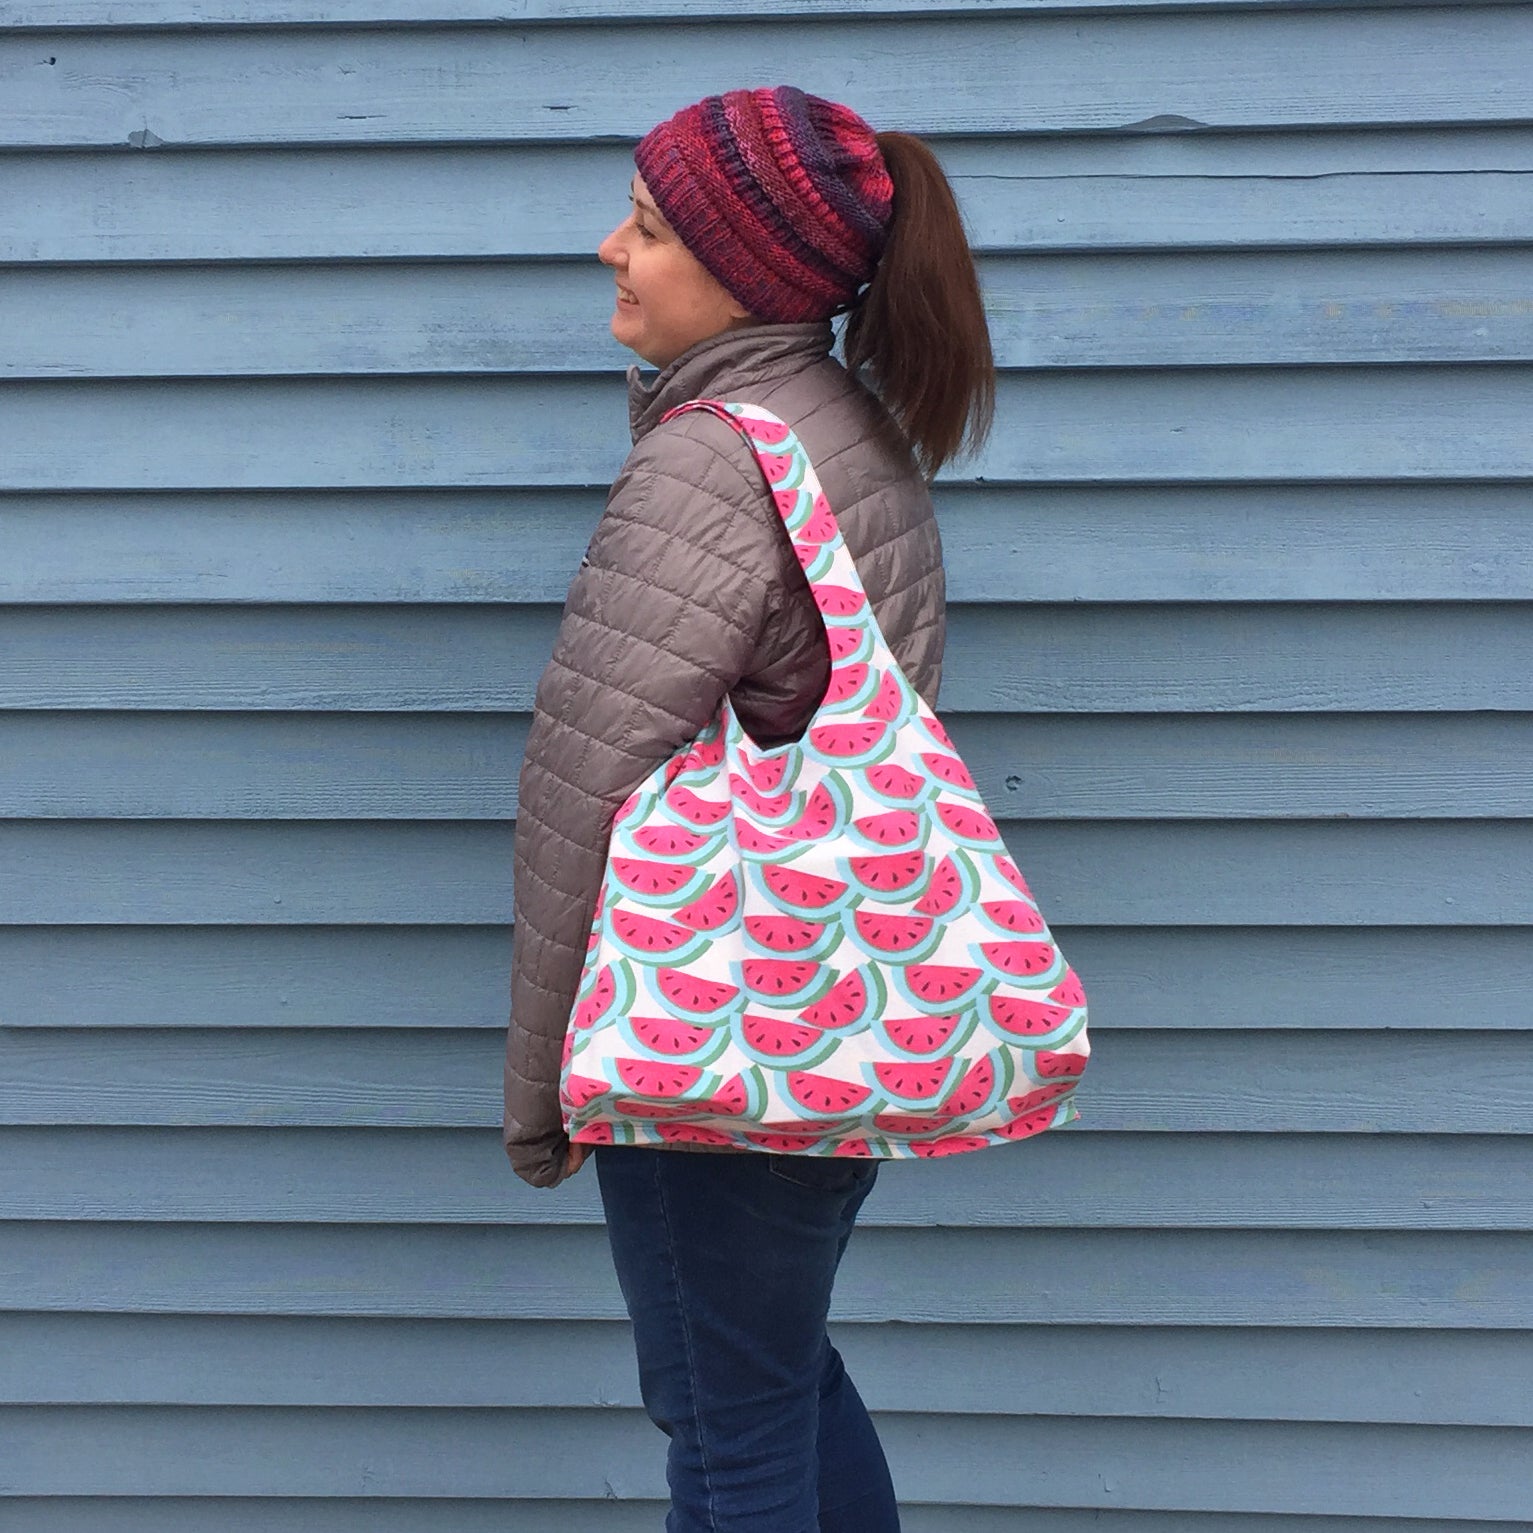 Large Reversible Shopping Bags: Sewing Pattern PDF– The Chilly Dog